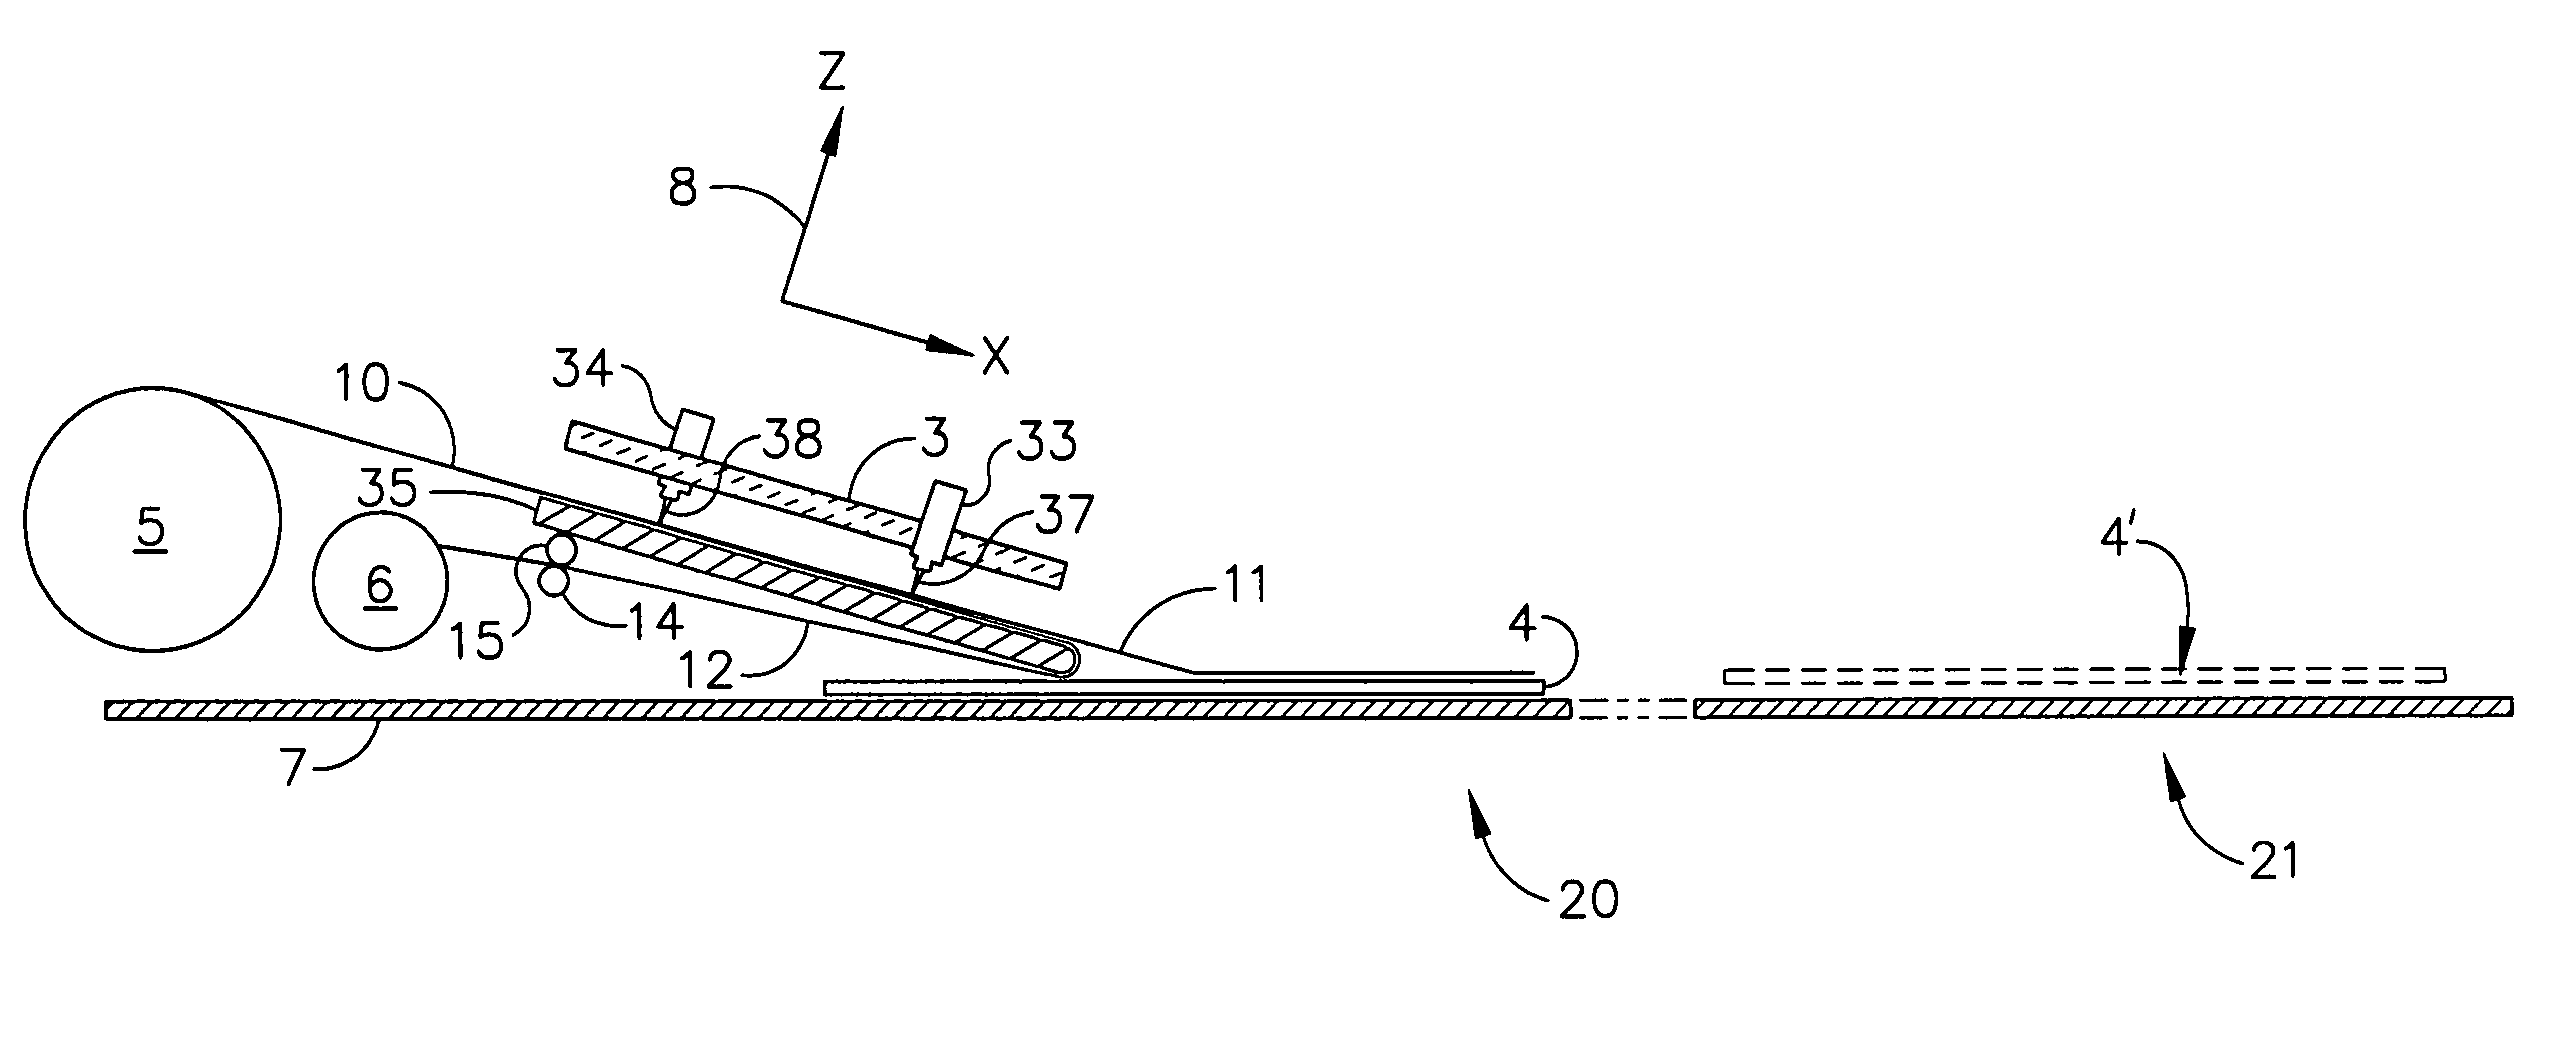 Apparatus and method for composite material trim-on-the-fly